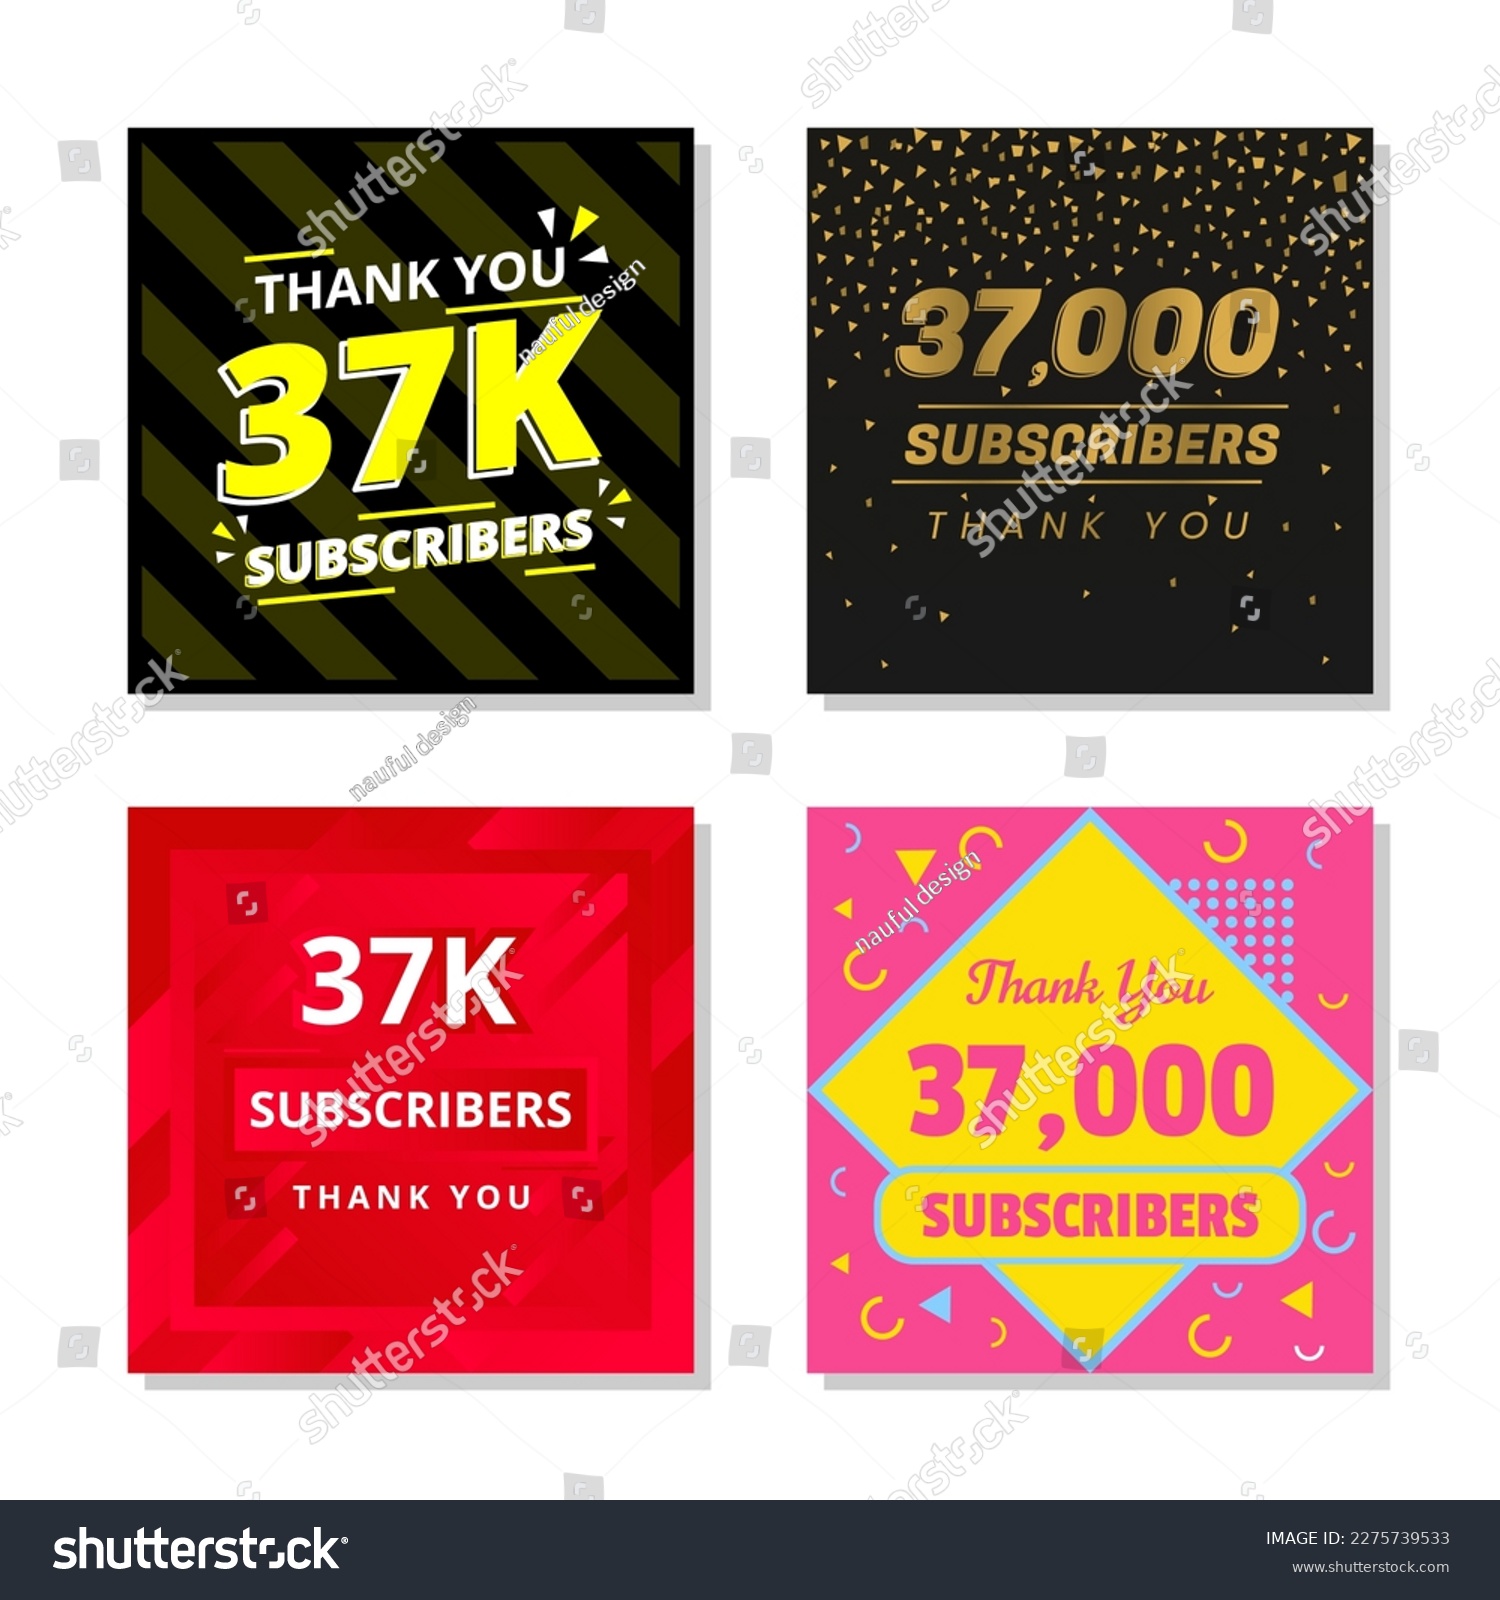 SVG of Thank you 37k subscribers set template vector. 37000 subscribers. 37k subscribers colorful design vector. thank you thirty seven thousand subscribers svg